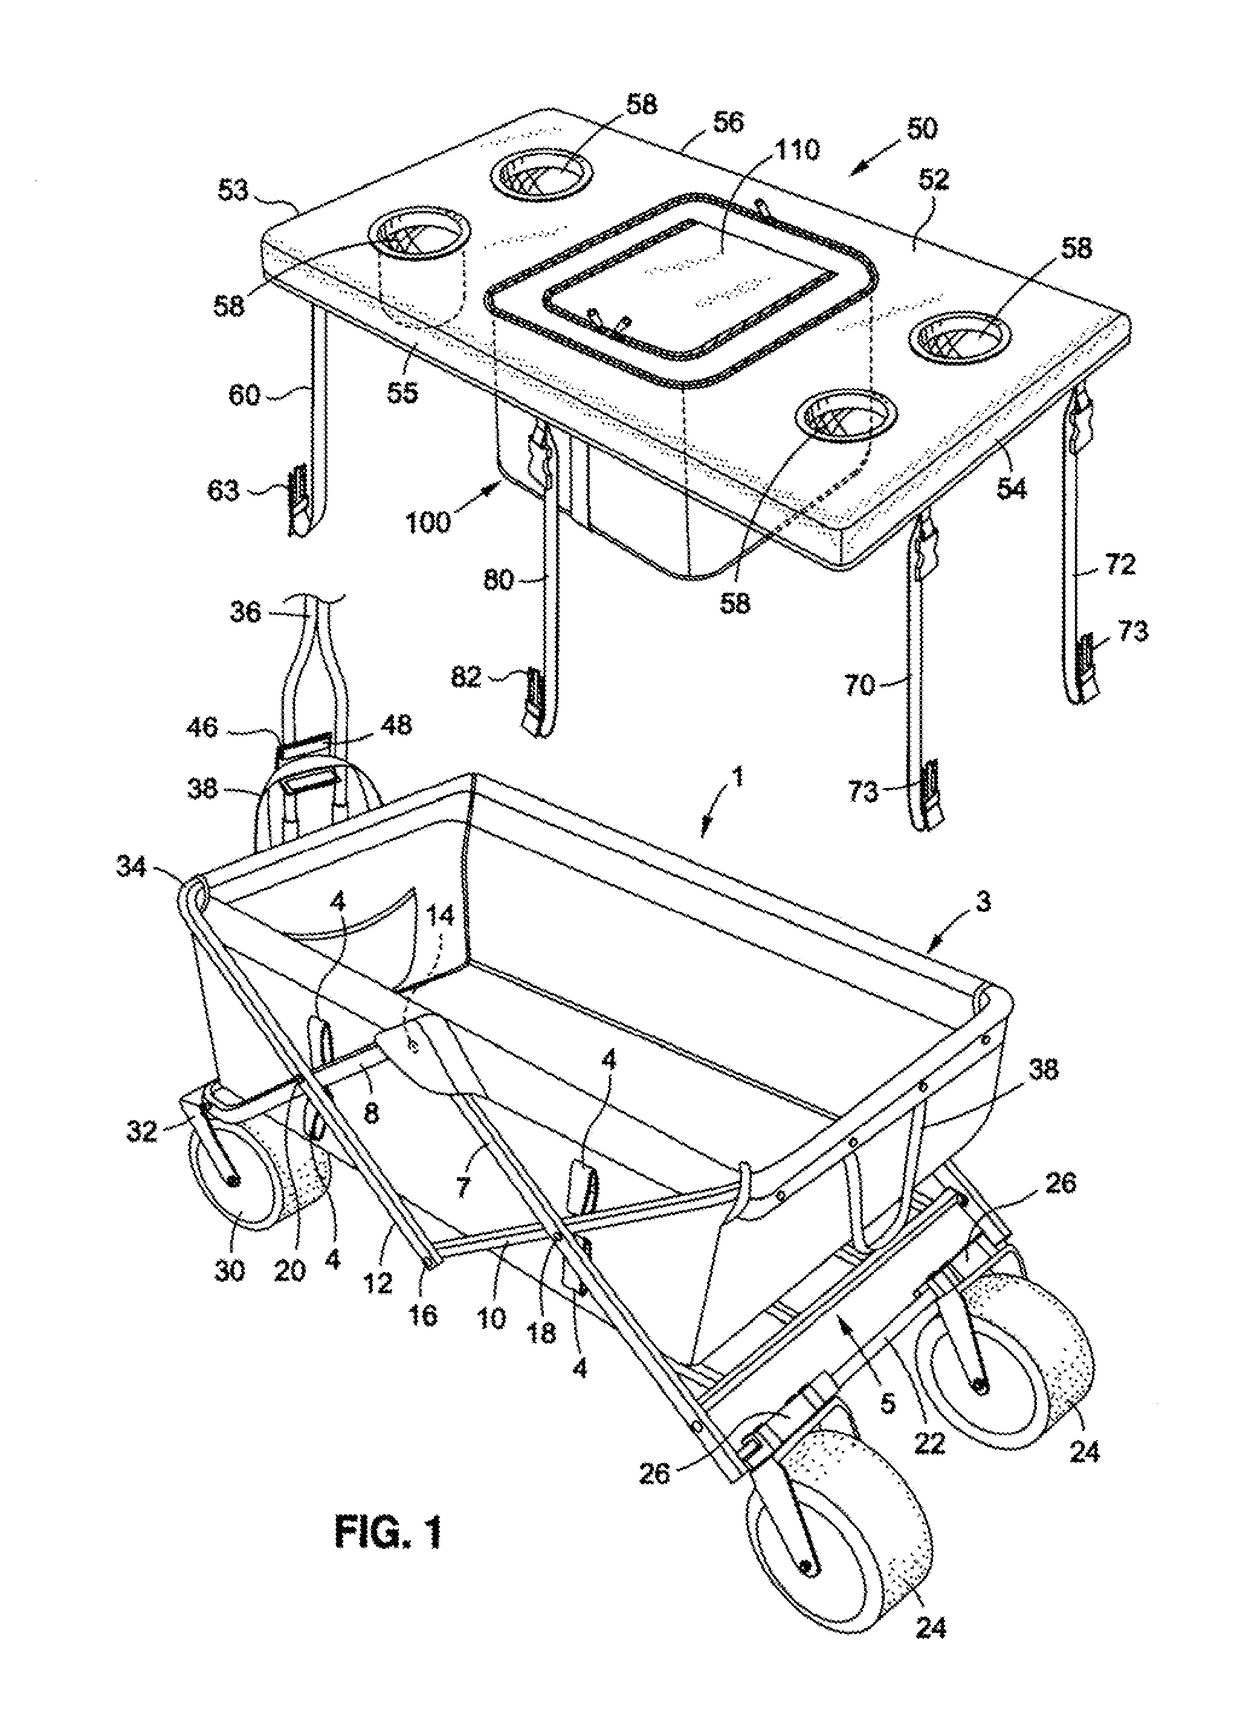 Folding wagon having a cooler and a removable table connected thereto